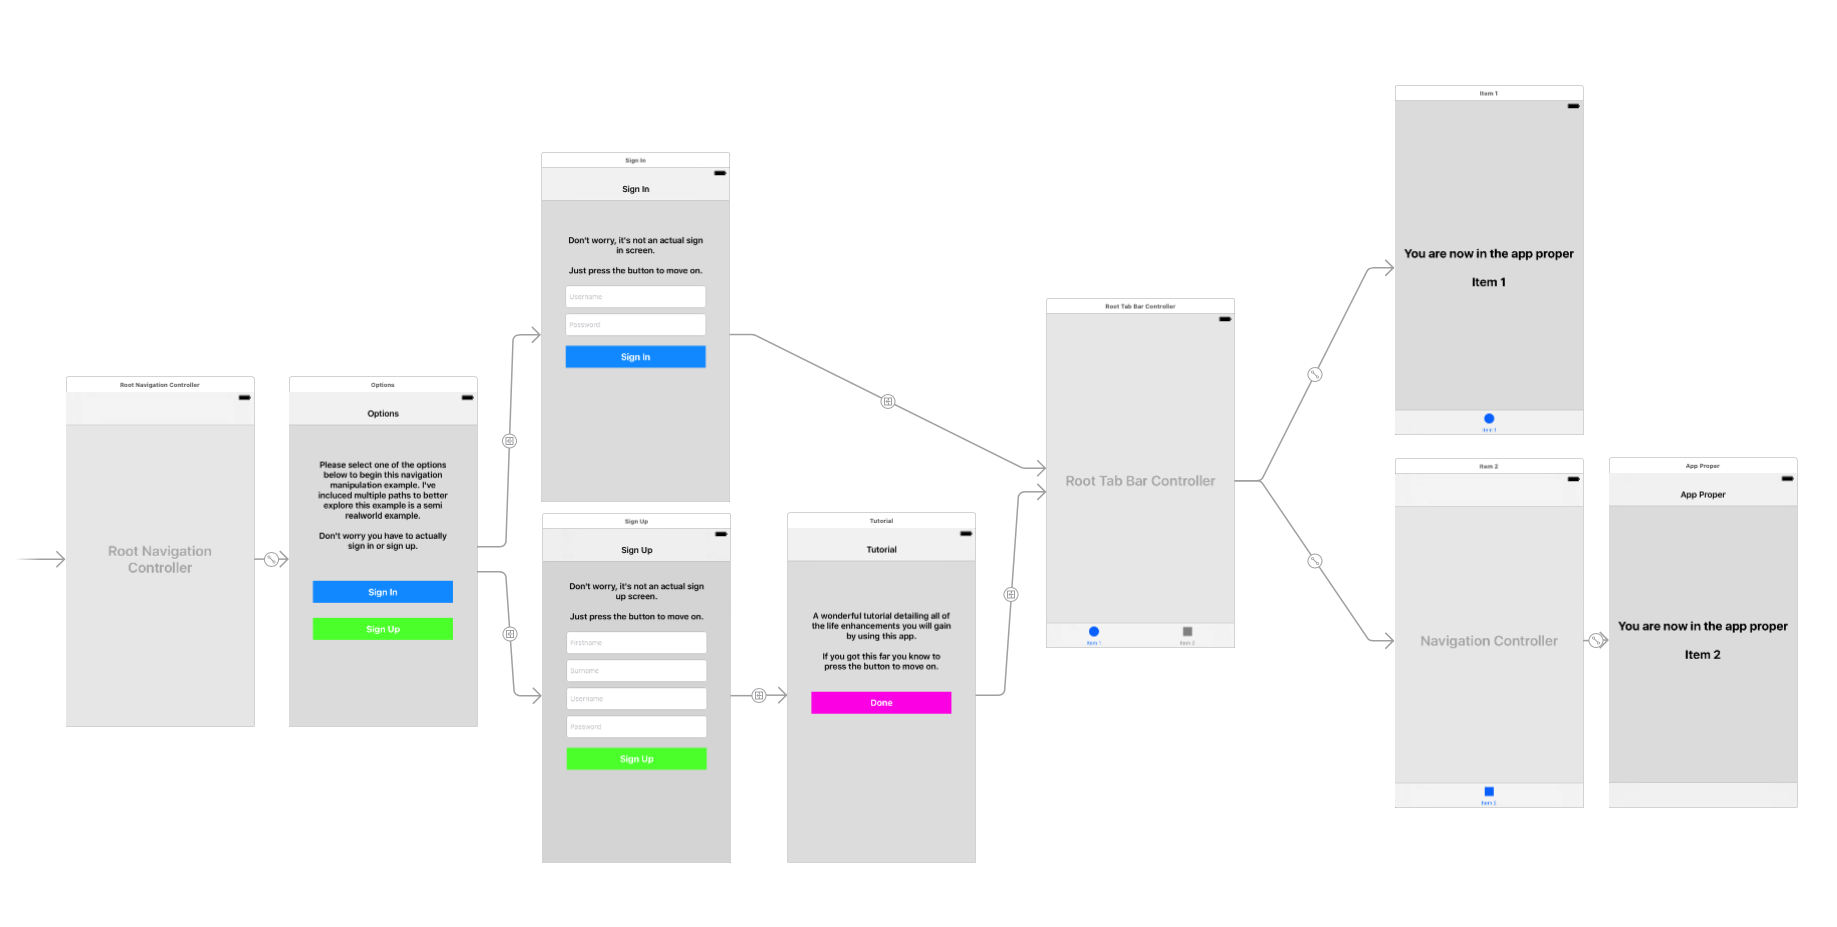 Diagram of the storyboard flow showing onboarding and main sections of the app